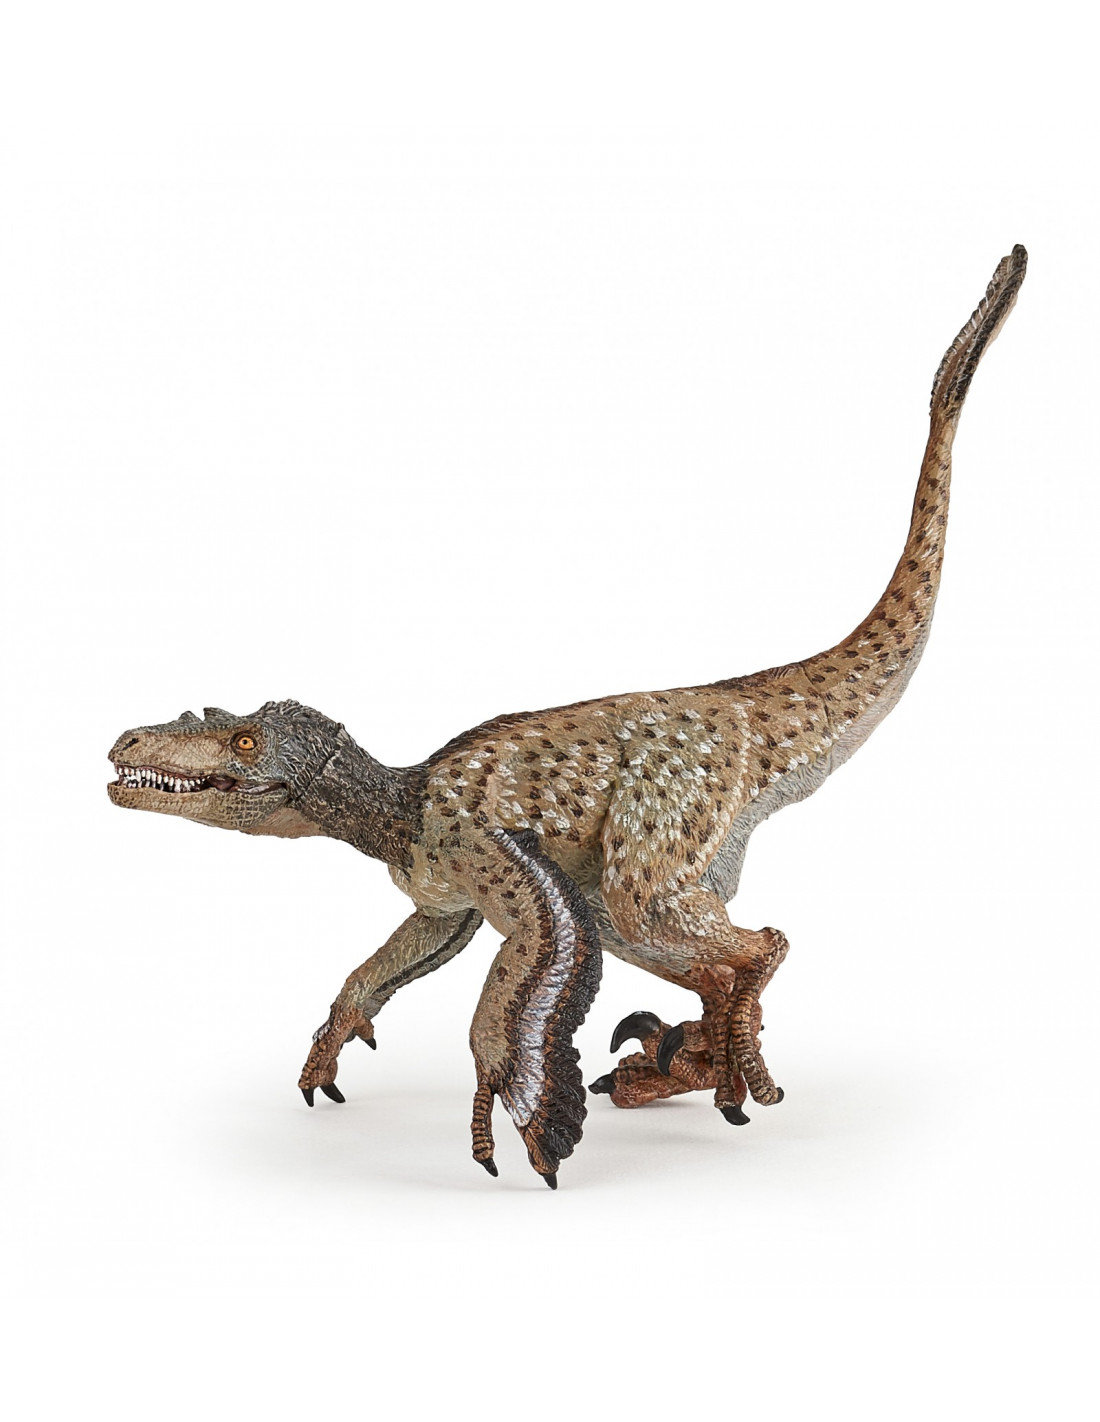 https://www.lapouleapois.fr/41384-thickbox_default/figurine-dinosaure-velociraptor-a-plumes-papo.jpg